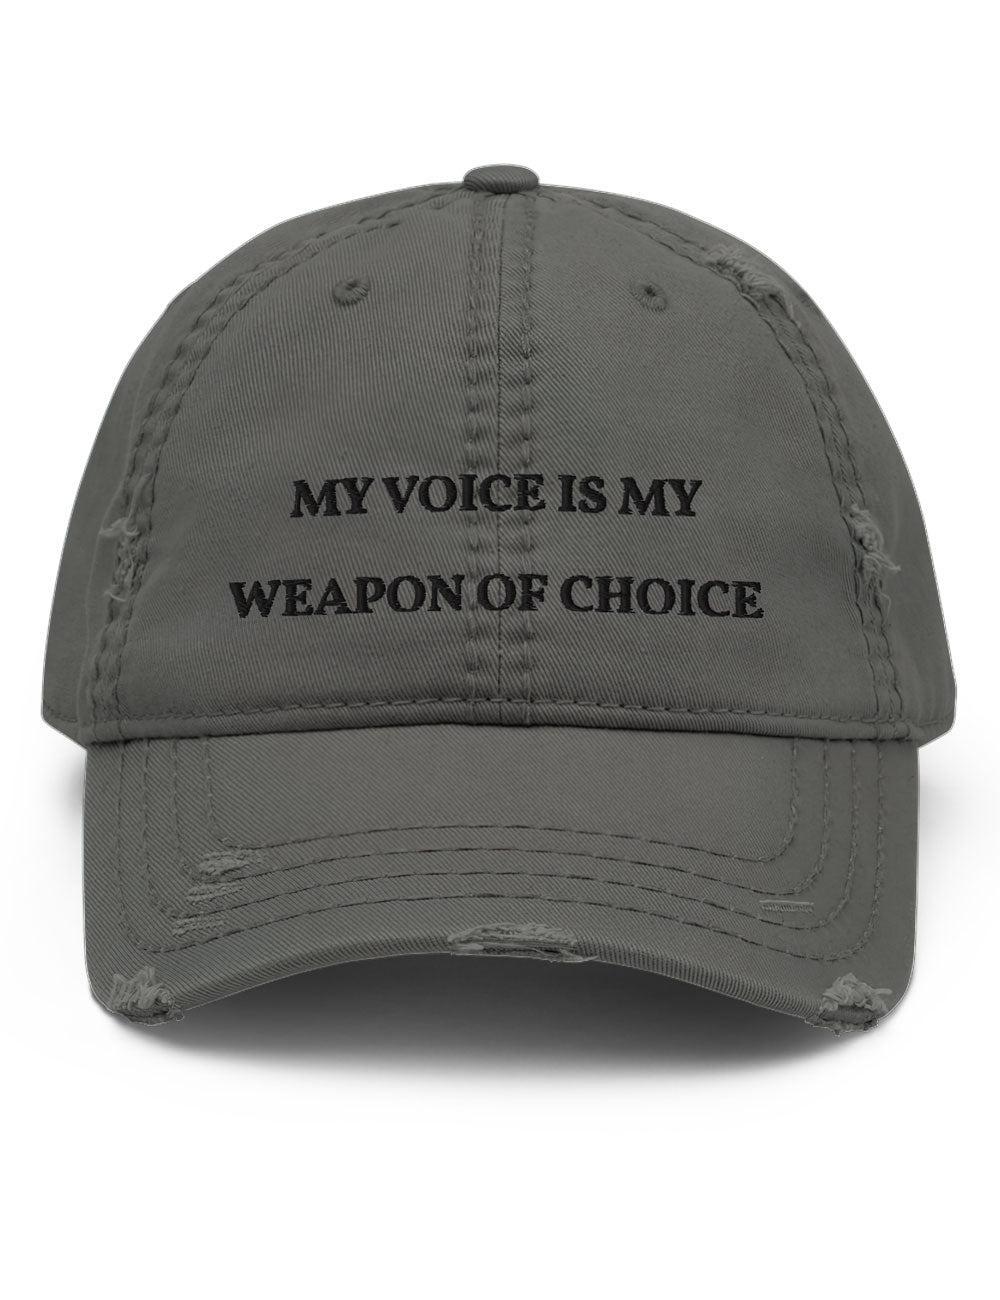 "Weapon of Choice" Distressed Cap